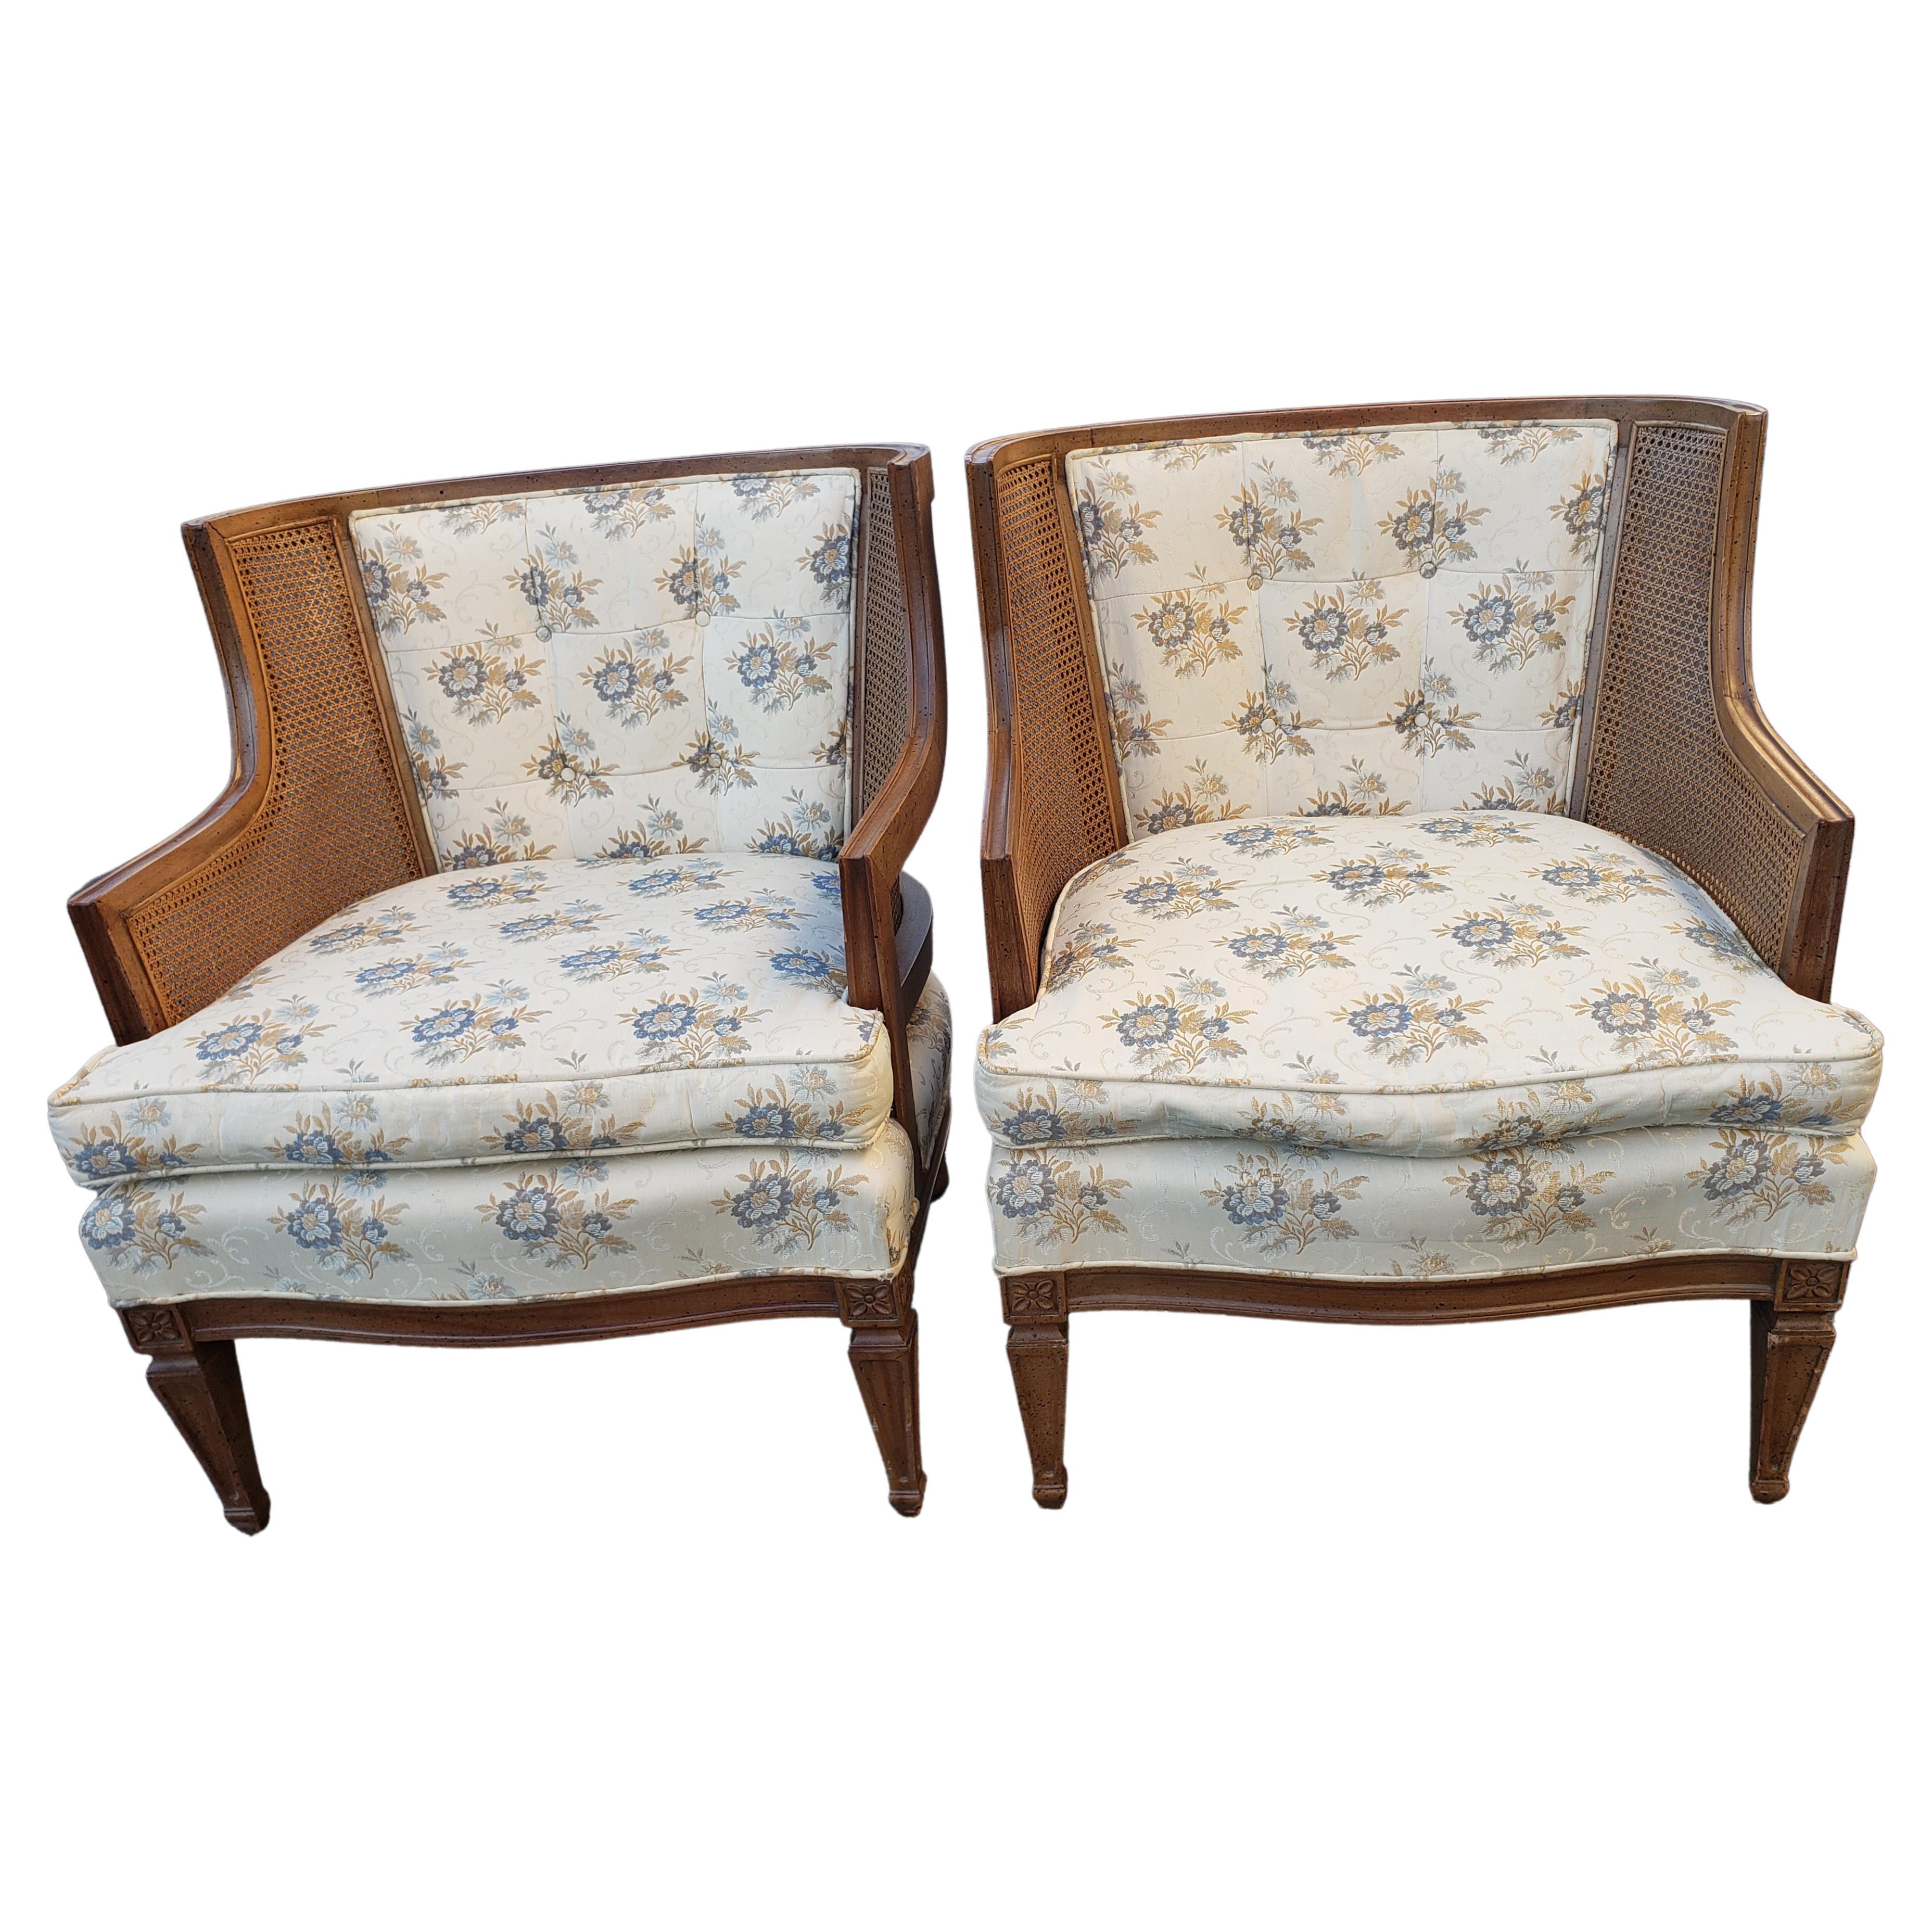 Caning Hibriten French Bergere Walnut Cane Upholstered Chairs, circa 1960, a Pair For Sale